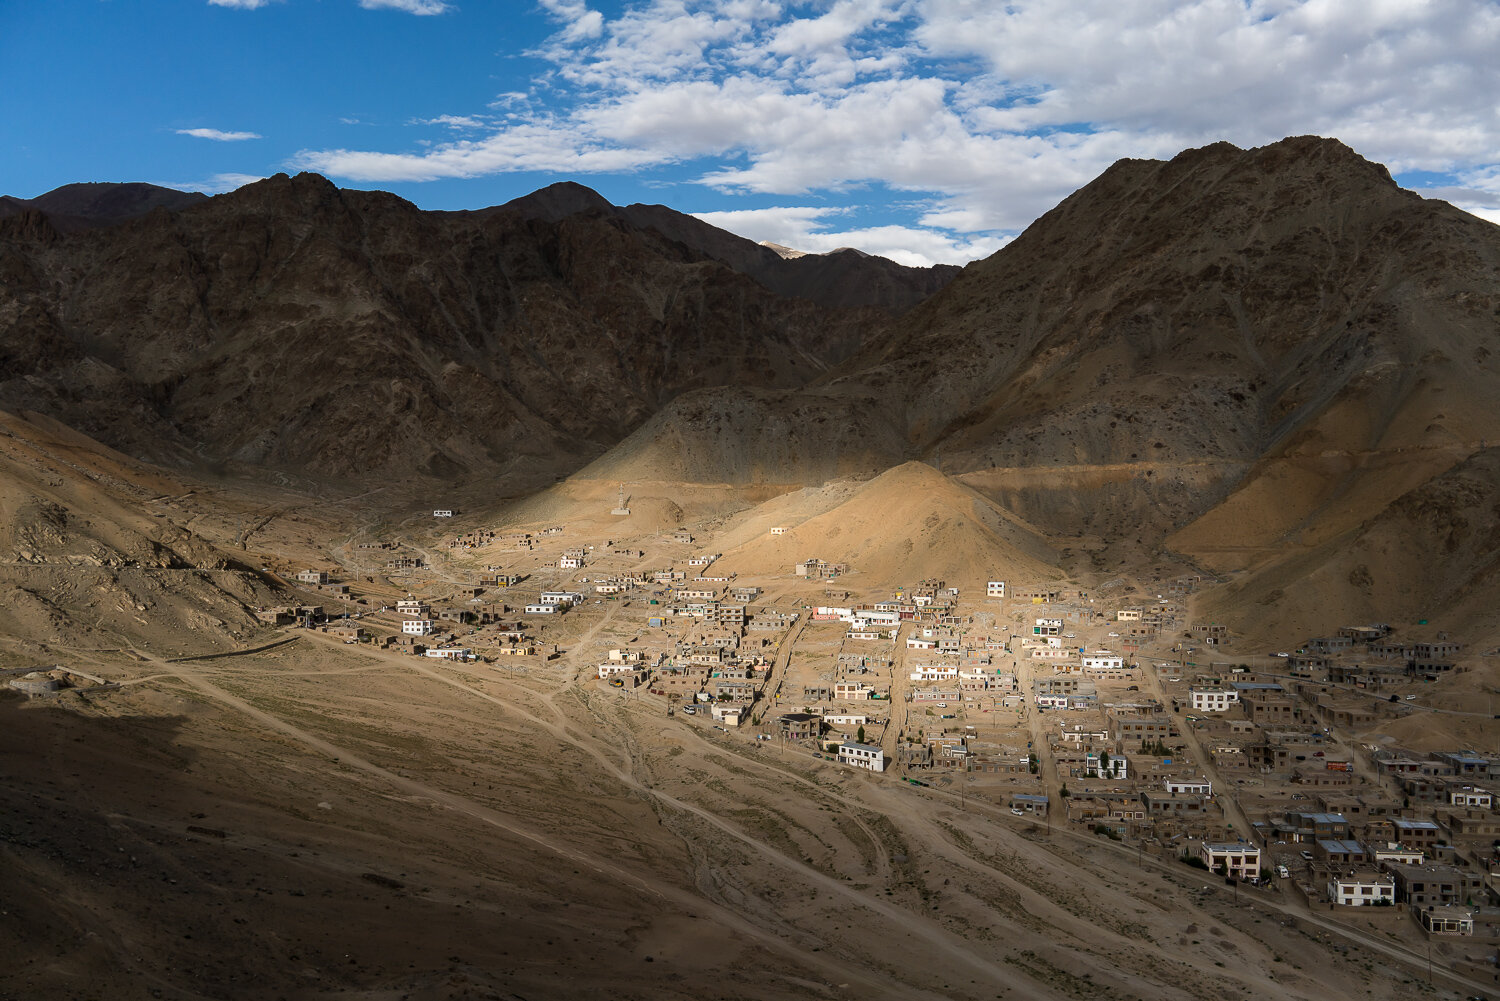  The rapidly-expanding Skampari neighborhood, which does not enjoy the same ease of access to fresh water as some other areas of the city, as seen from the Namgyal Tsemo Temple on Thursday, August 8, 2019 in Leh, Ladakh, India. As Leh expands, the su